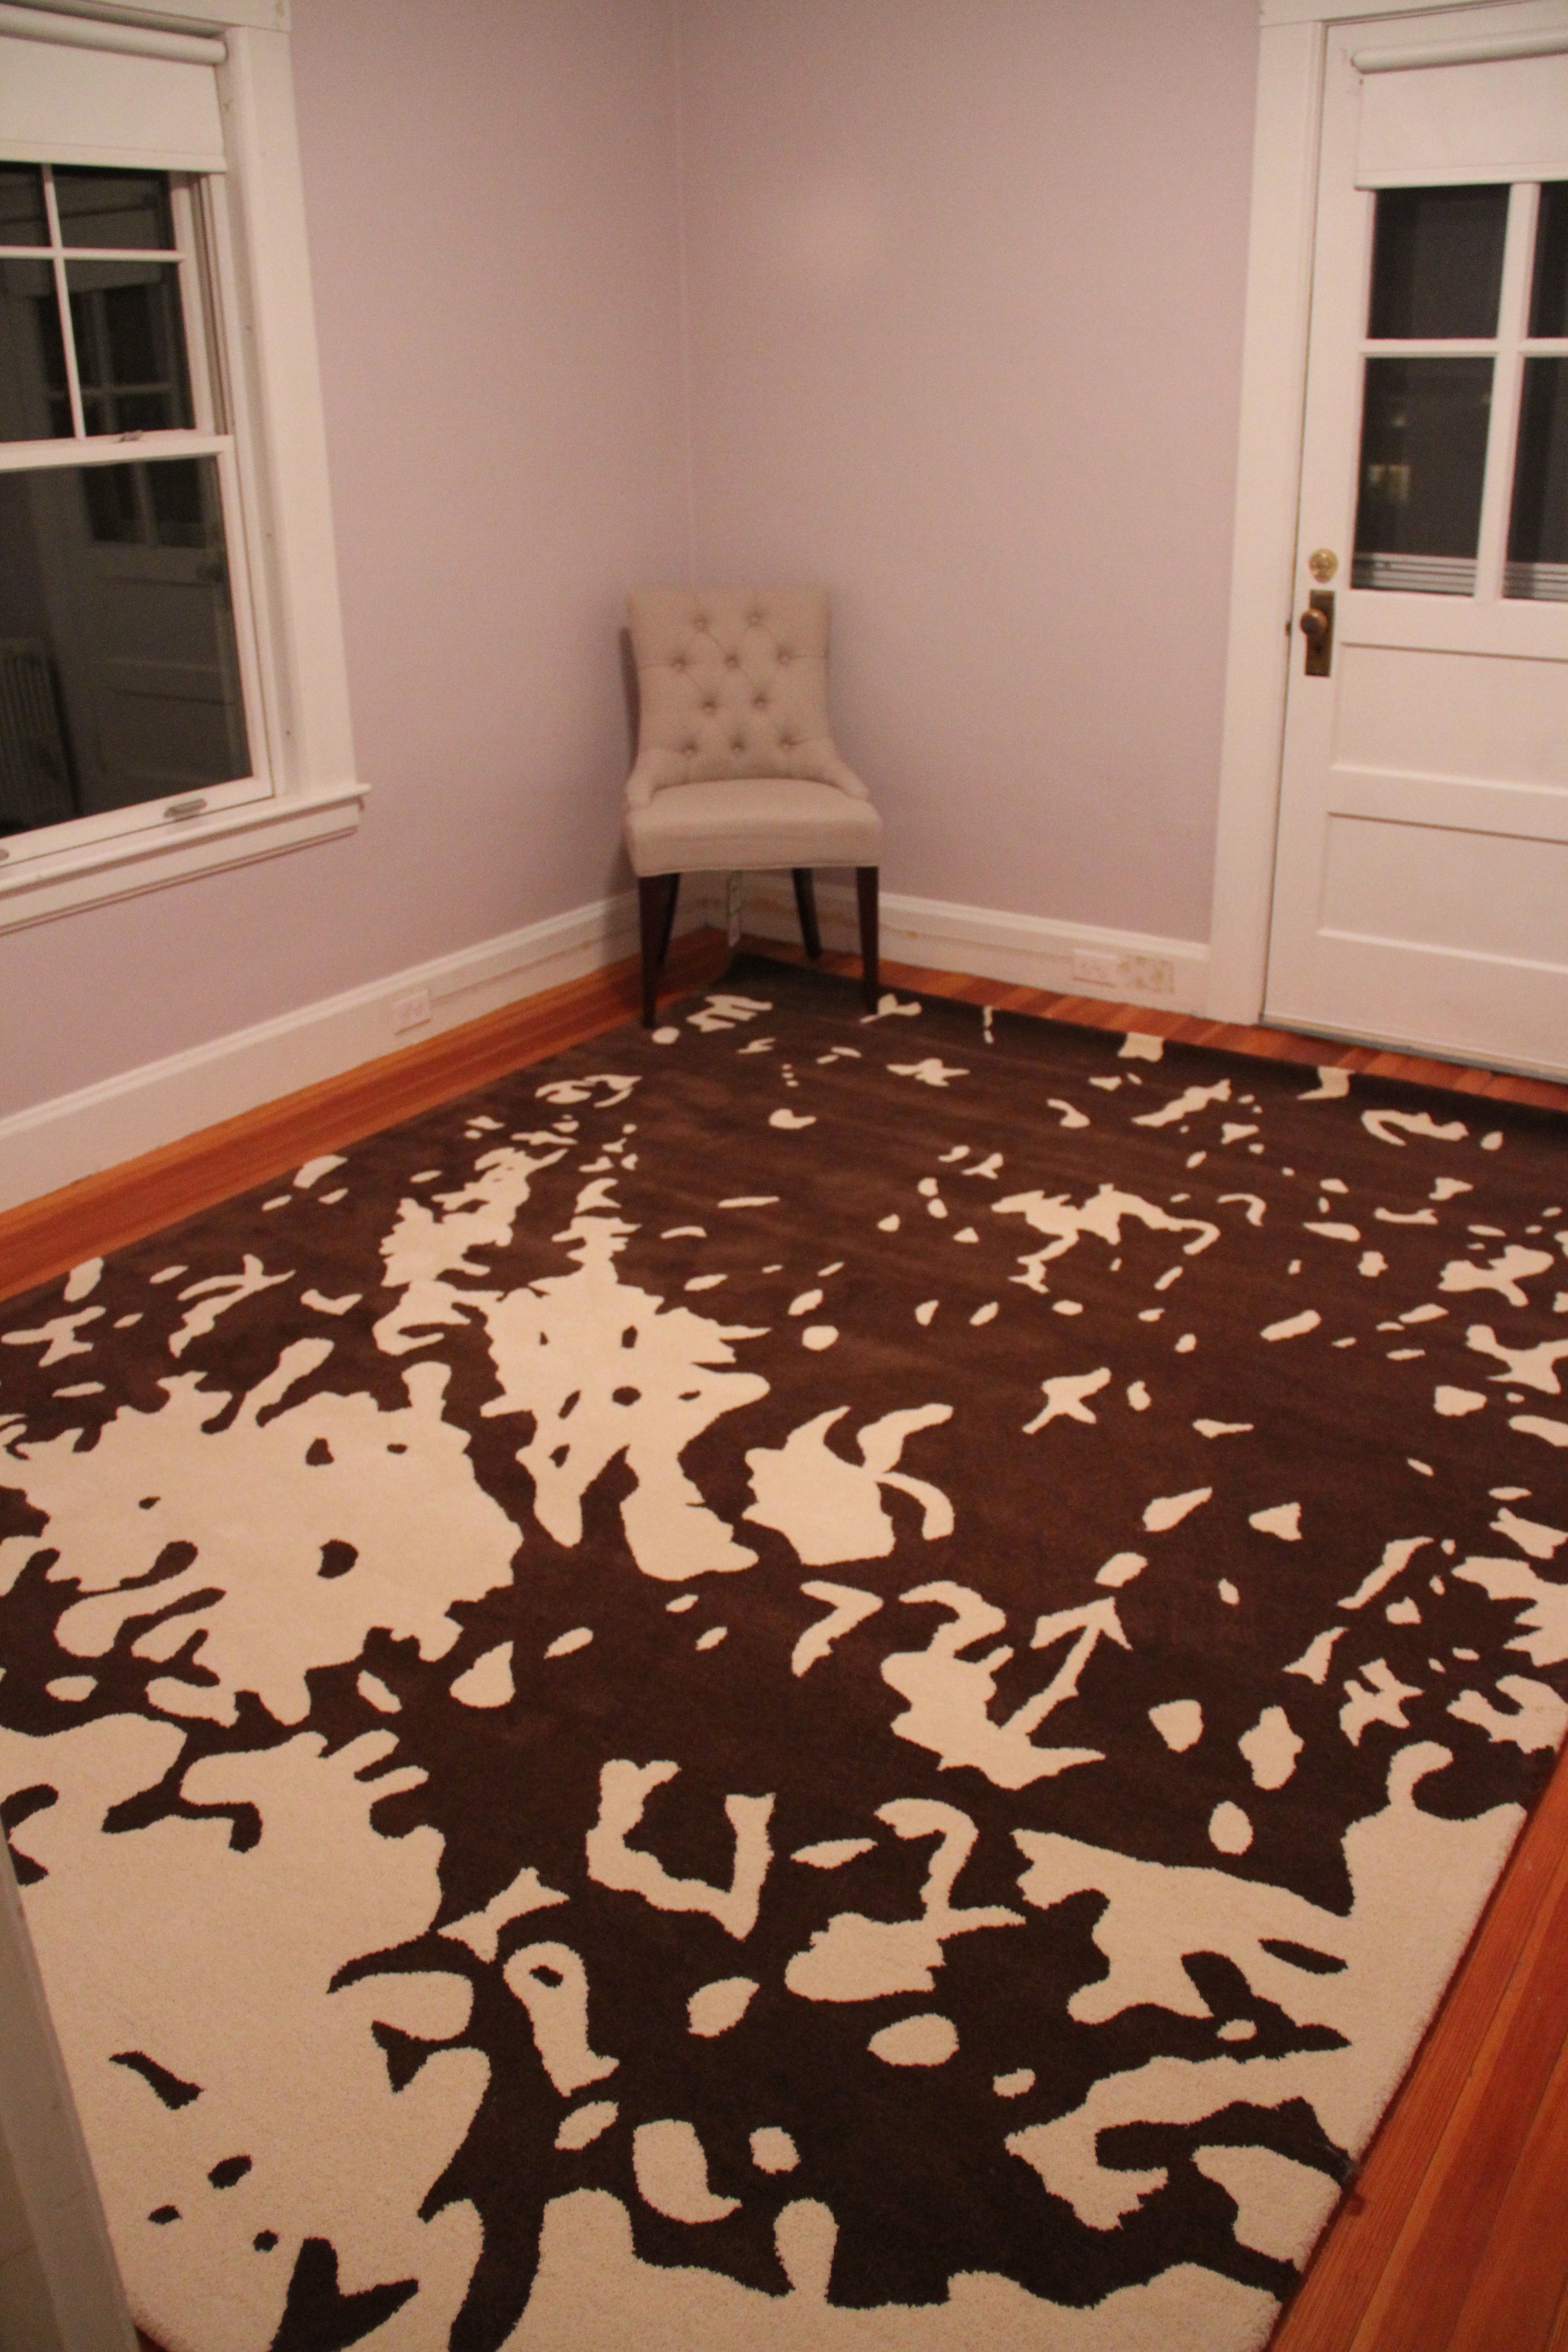 And then we unveiled the rug that's been in our dining room for 3 months. I think I still like it.